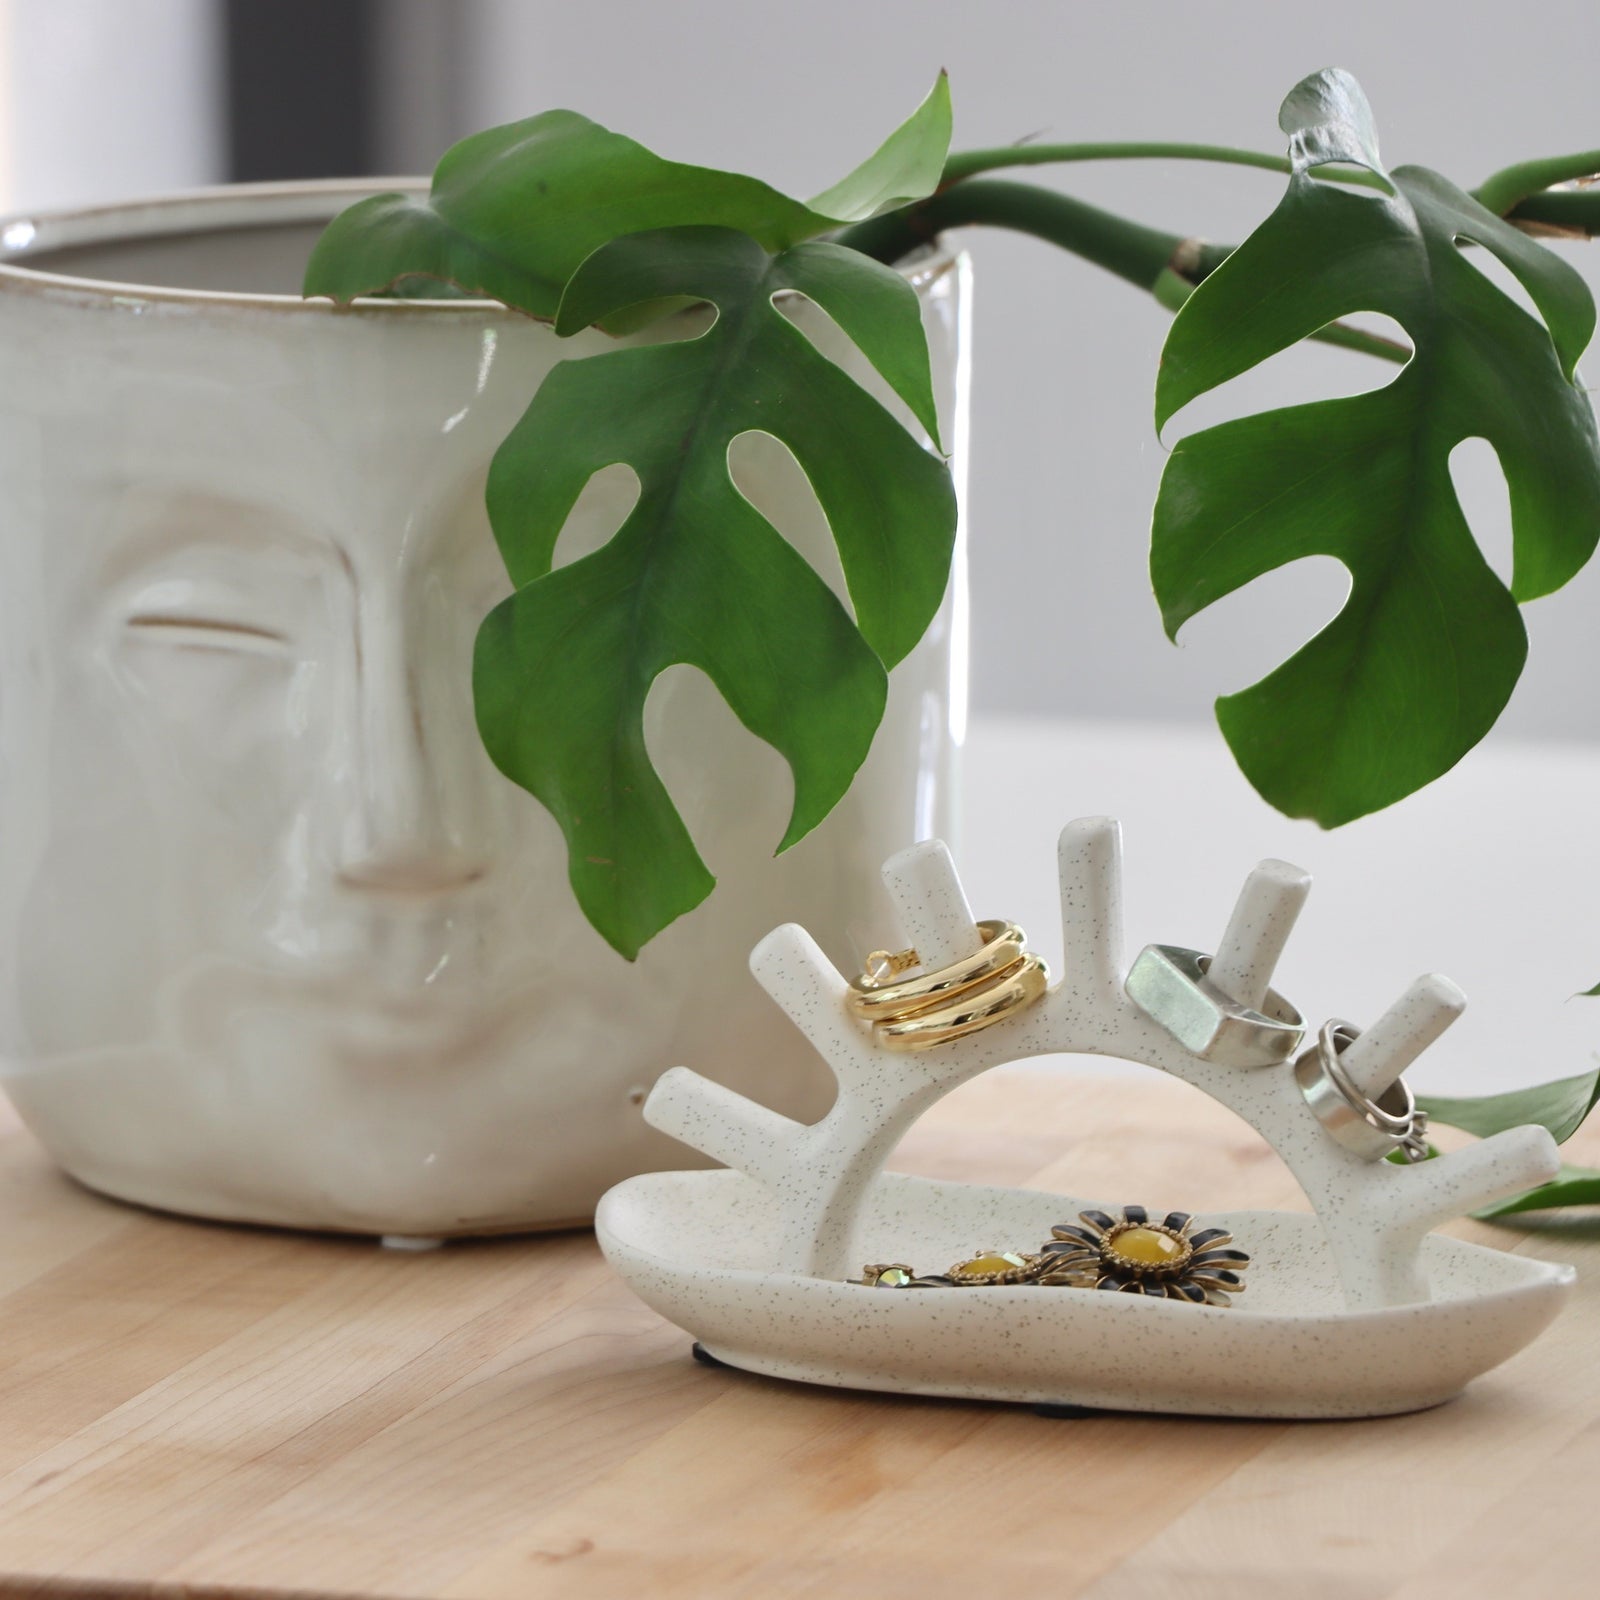 5 Cute Planters You Need In Your Home